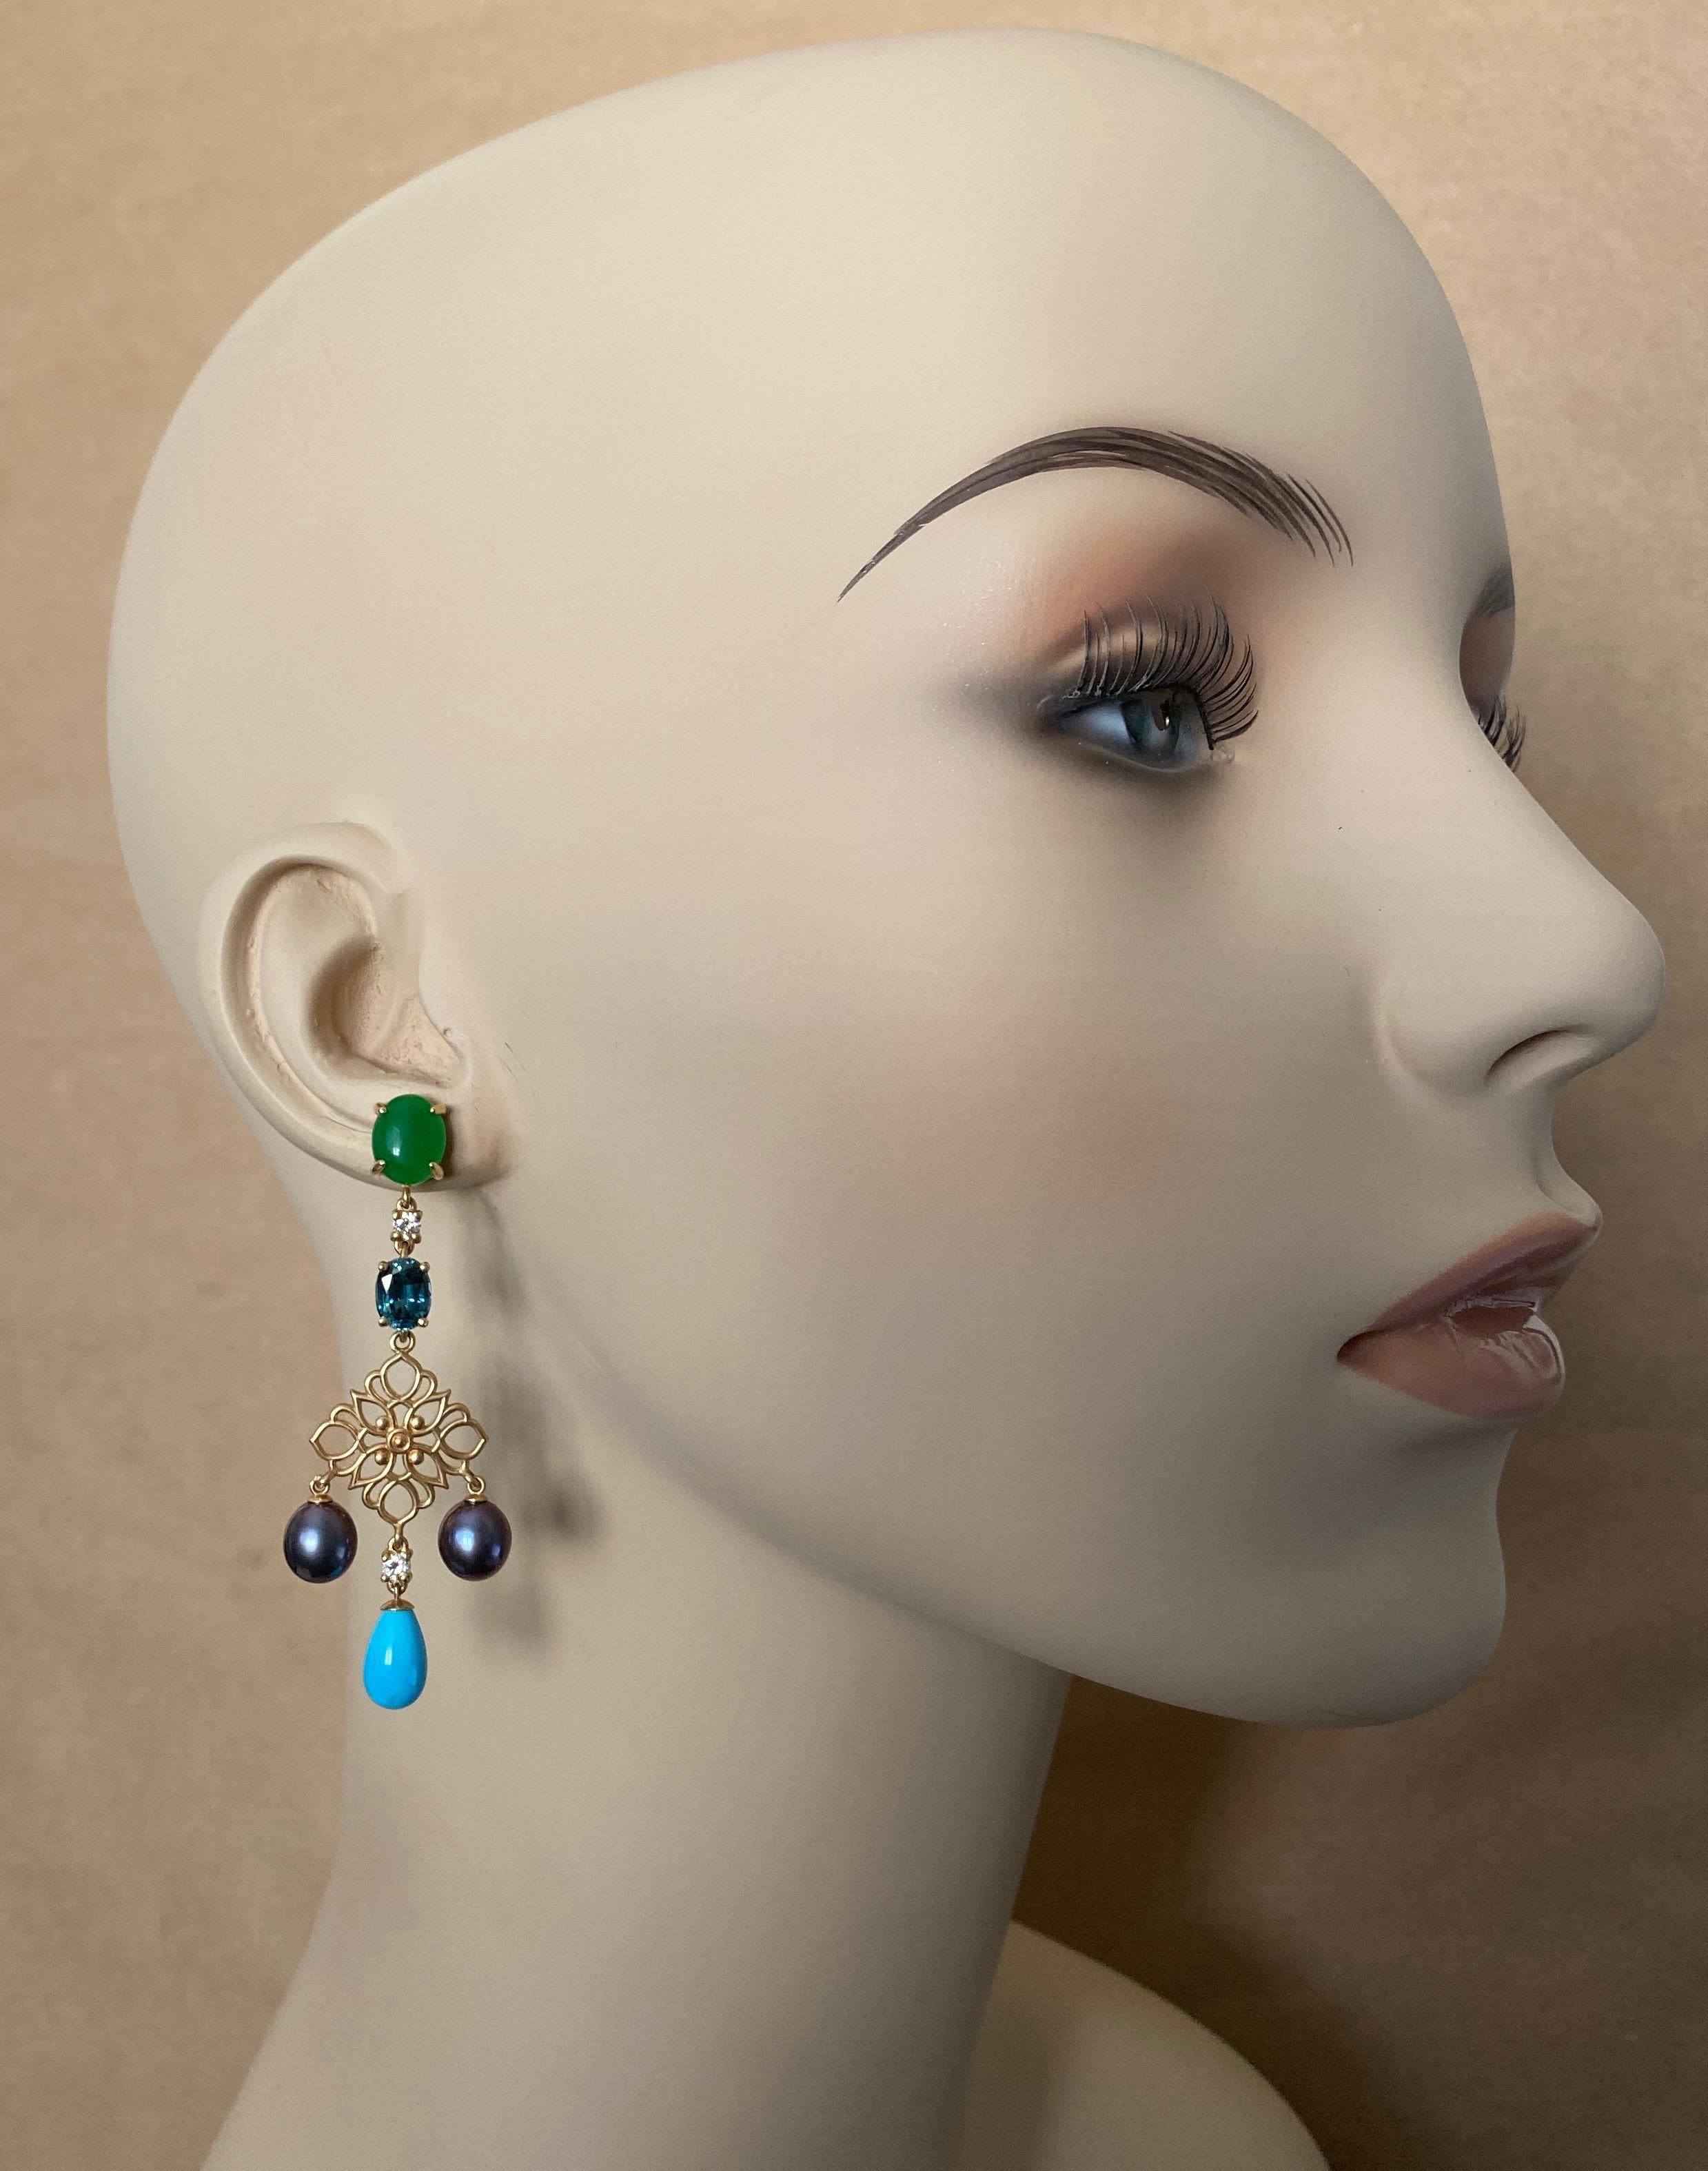 Brilliant apple green chrysoprase (origin: Germany) are combined with turquoise colored, oval cut and faceted zircon (origin: Sri Lanka), white diamonds, black cultured pearls and Sleeping Beauty turquoise drops (origin: Arizona) in these striking